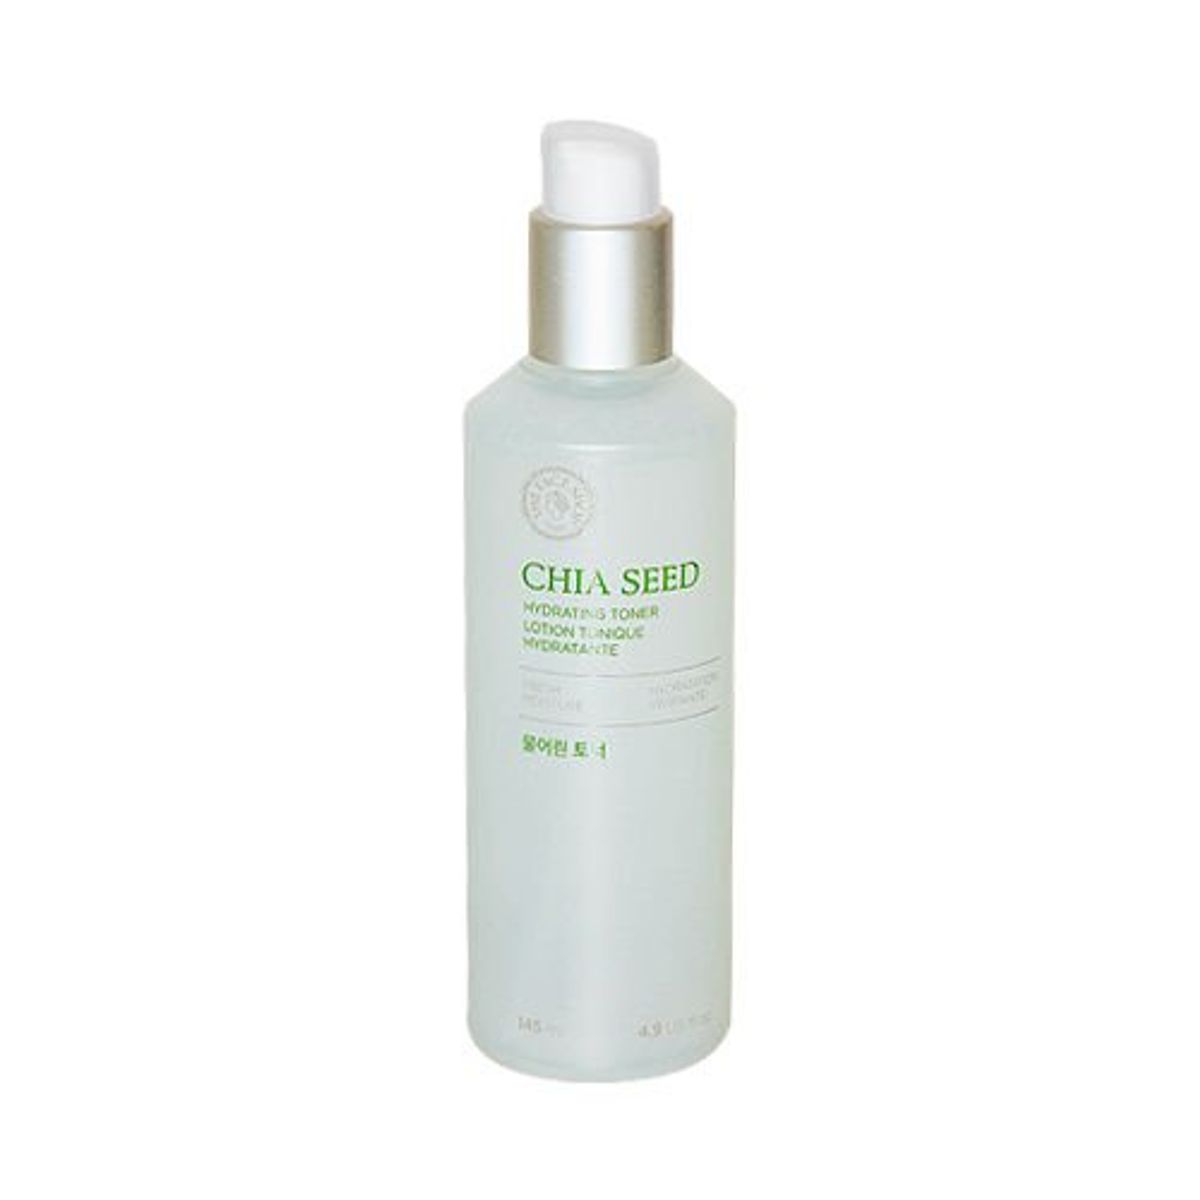 nuoc-can-bang-cung-cap-am-thefaceshop-chia-seed-hydrating-toner-145ml-1